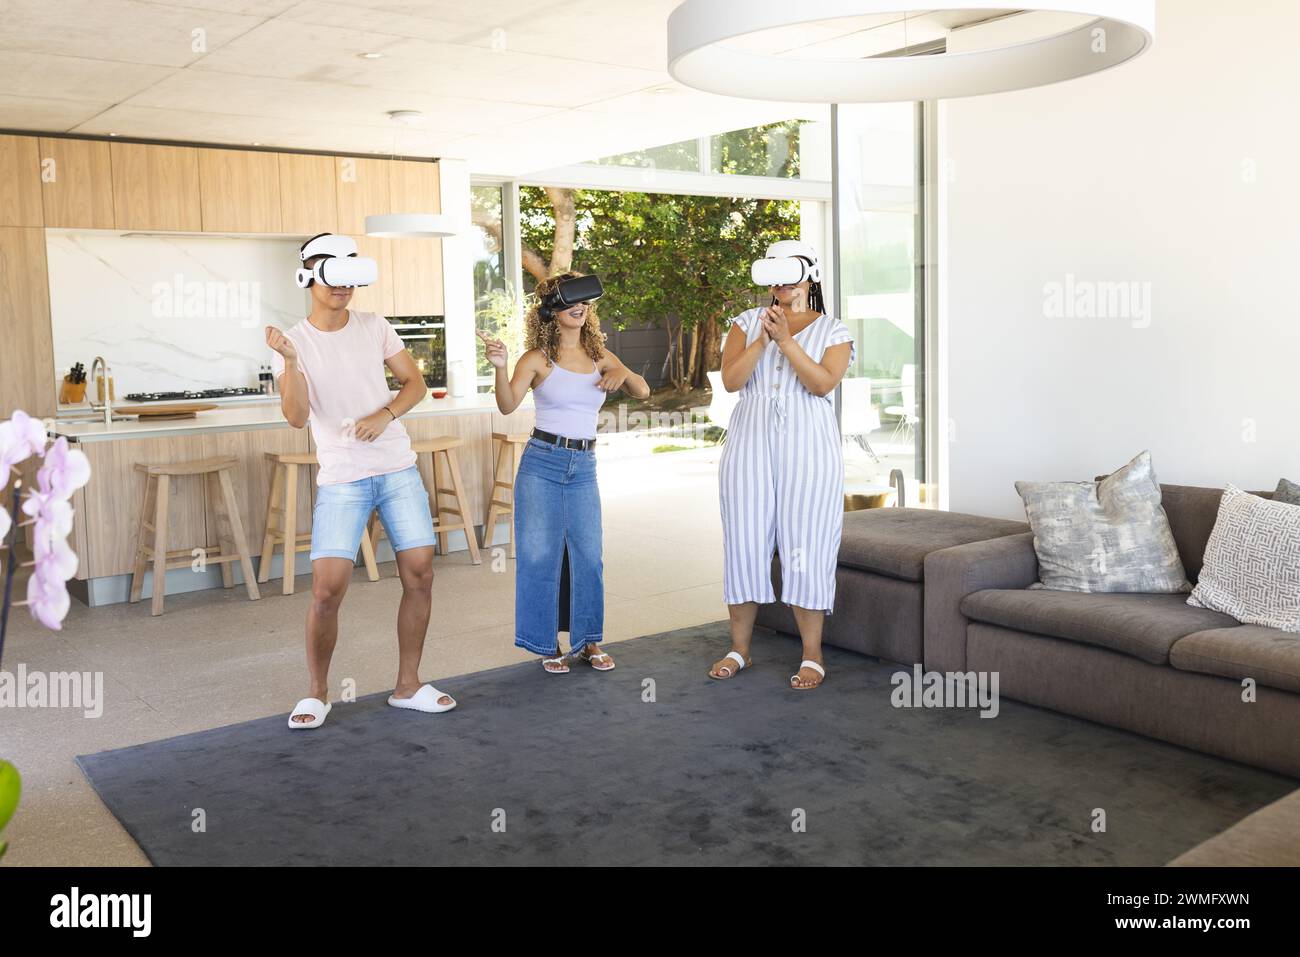 Young Asian man and two young biracial women enjoy virtual reality at home Stock Photo